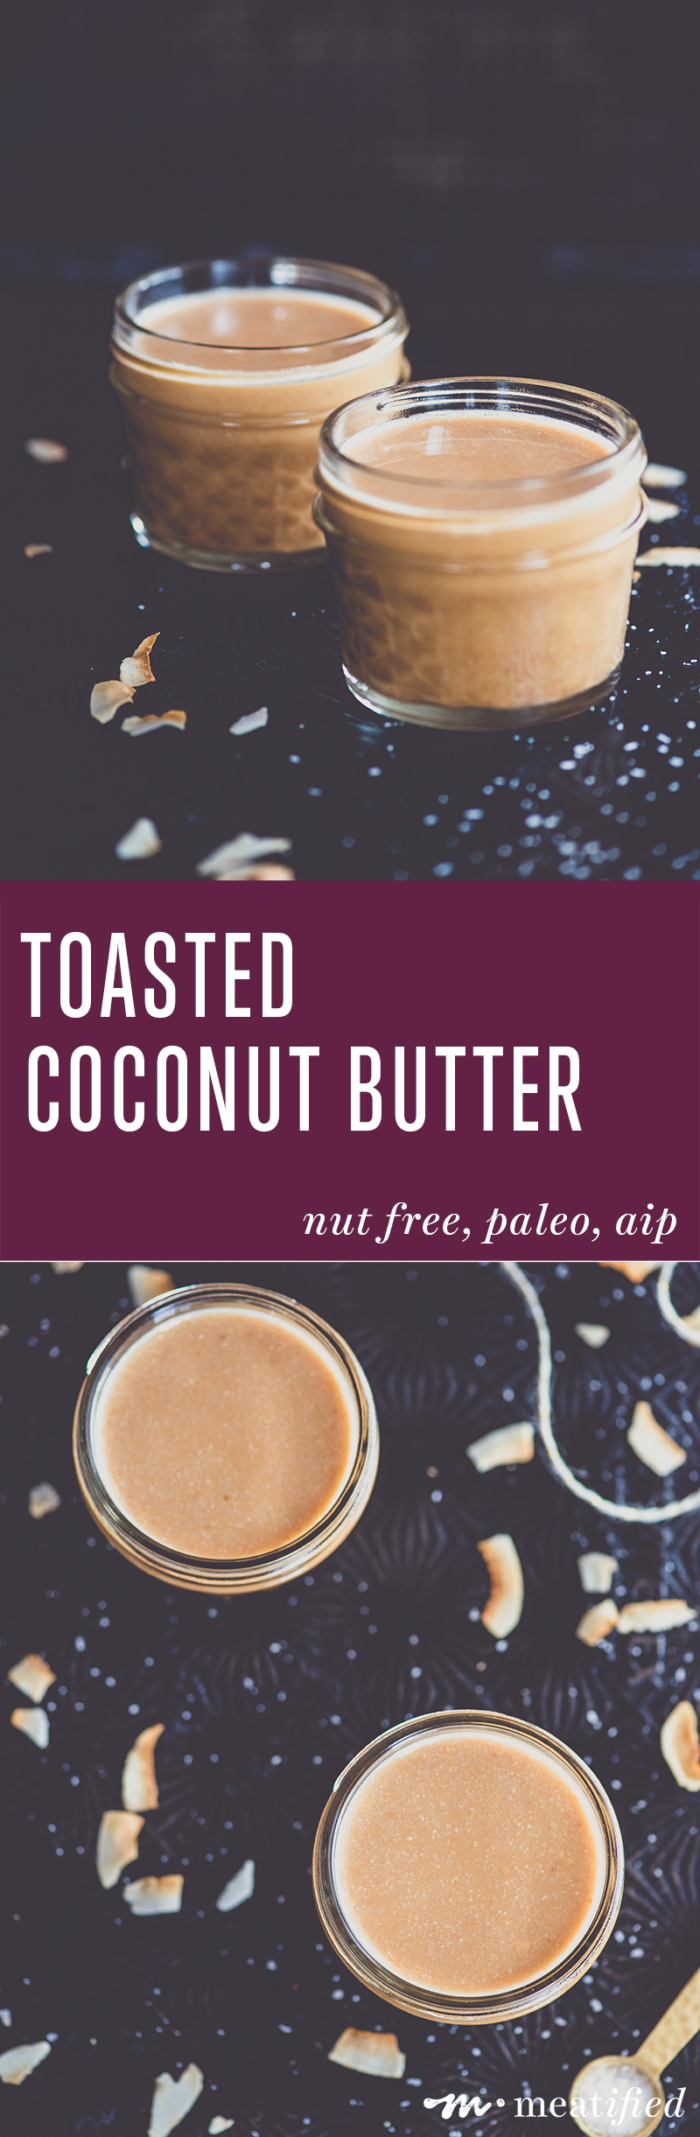 If you like coconut butter, you're going to love this toasted coconut butter from http://meatified.com. It's richer, nuttier & less sweet and best when made with a pinch or two of salt.